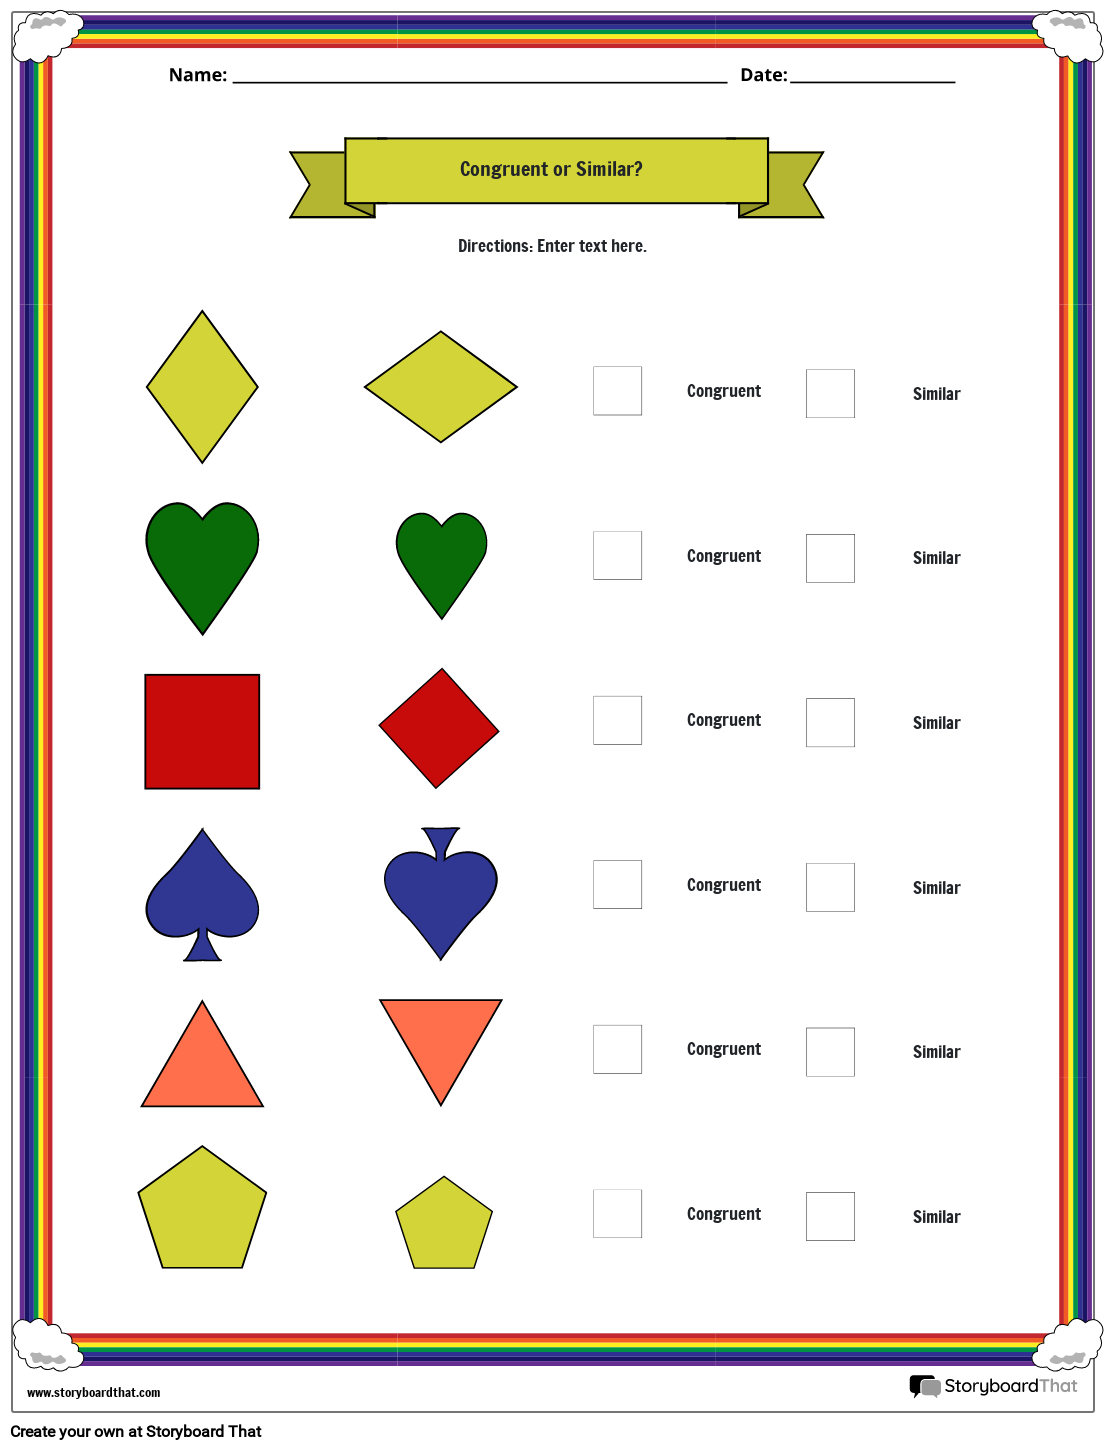 Congruent or Similar Shapes Worksheet with Rainbow Theme